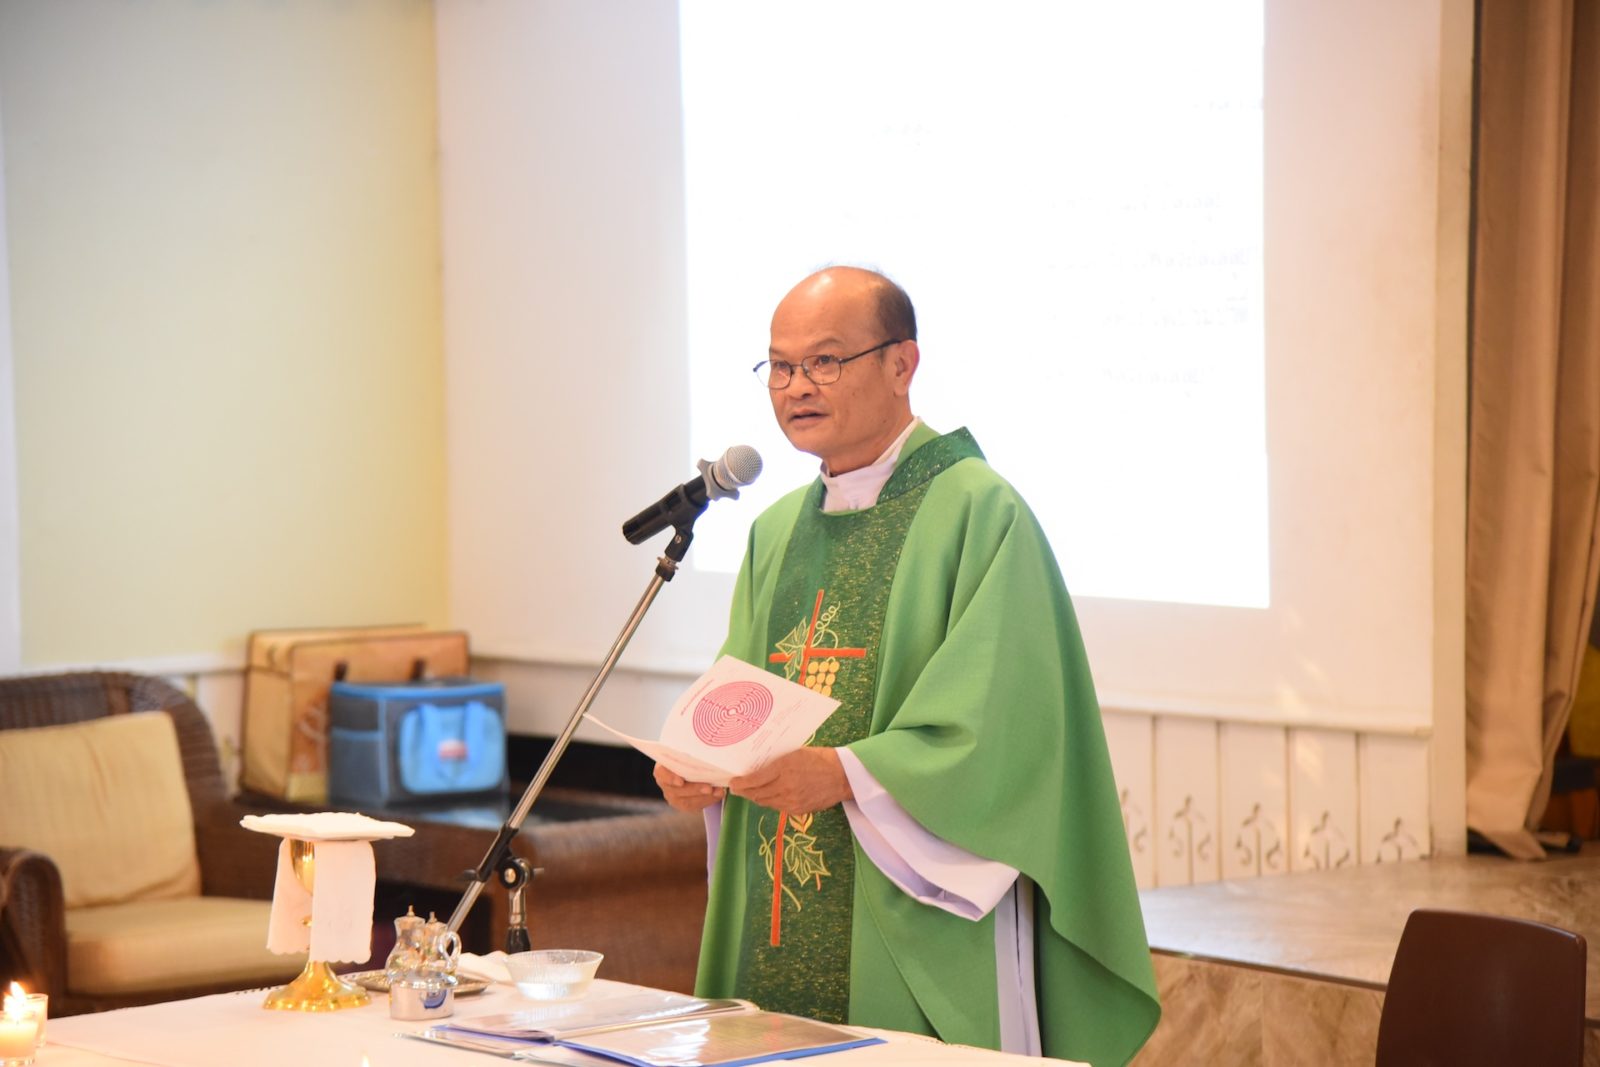 image of father Chanchai, the main speaker